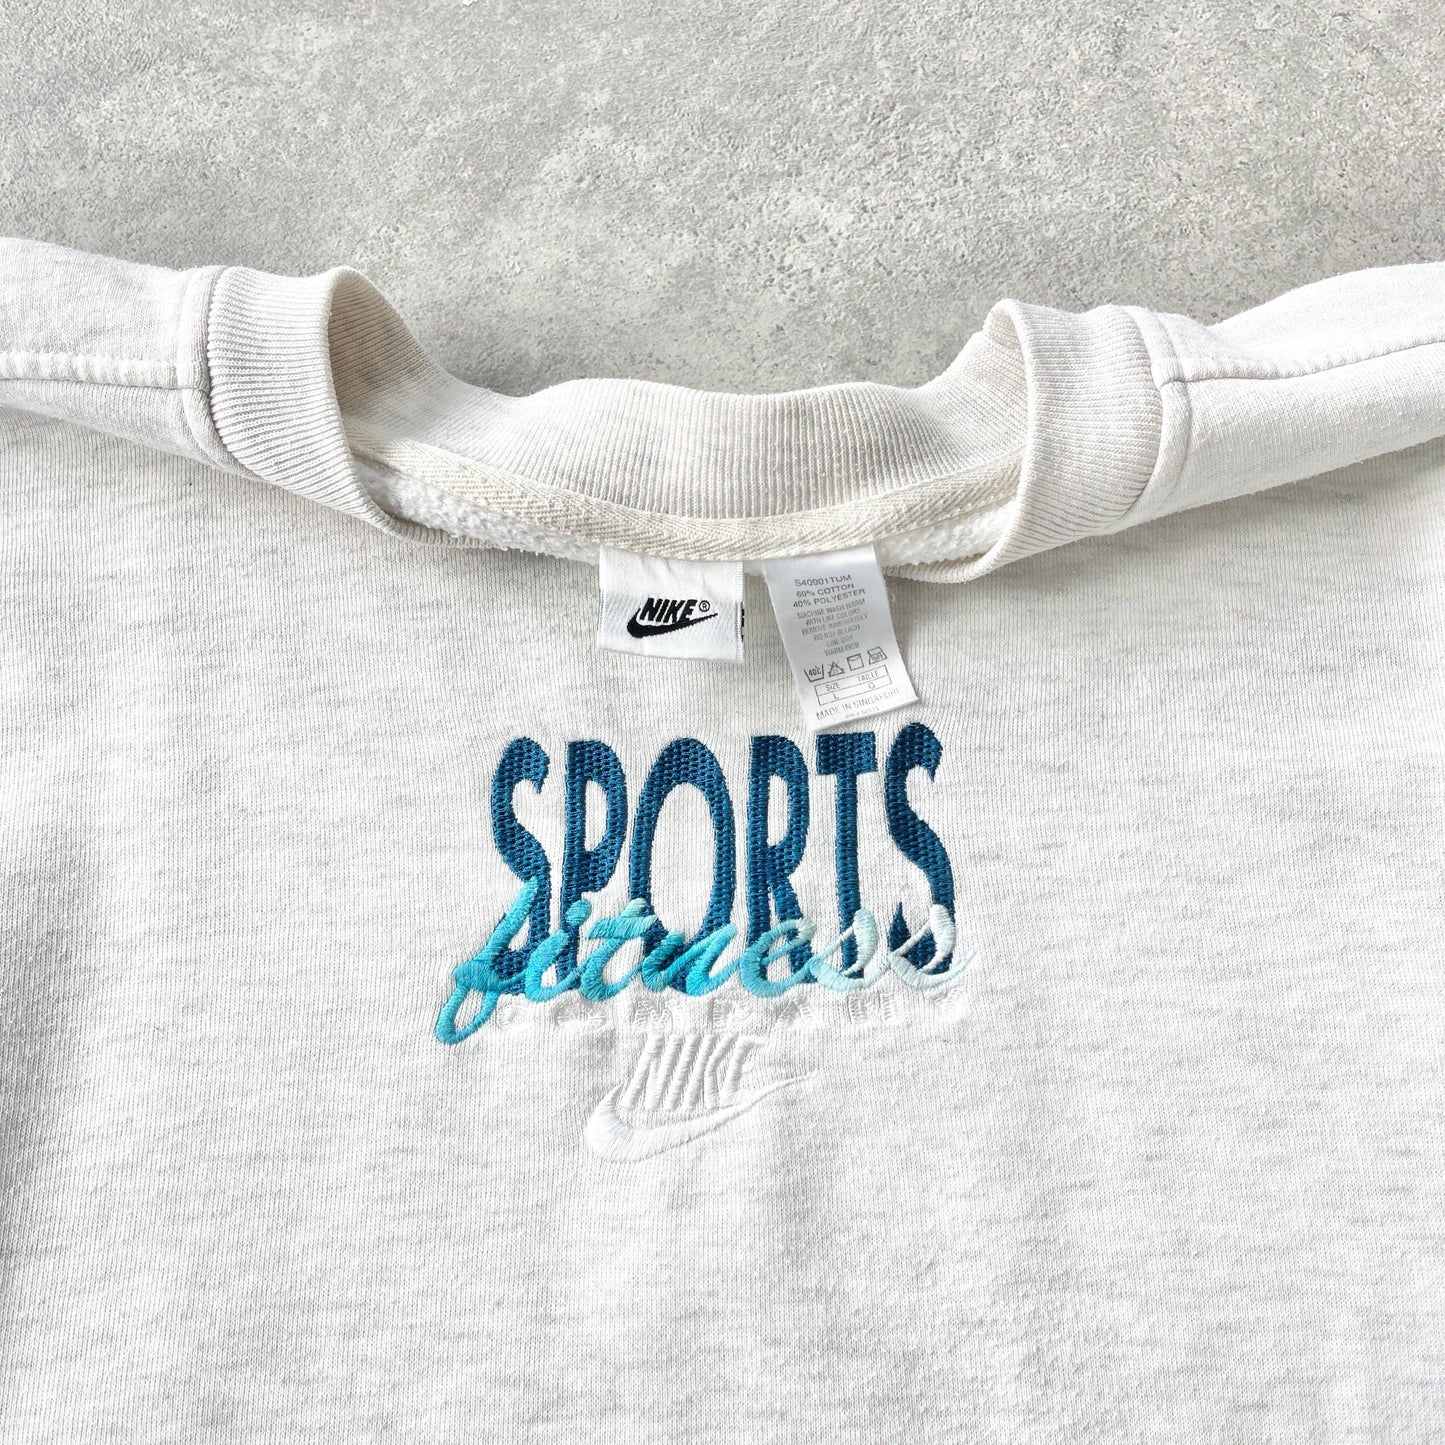 Nike RARE 1990s ‘sports fitness’ heavyweight embroidered sweatshirt (L) - Known Source